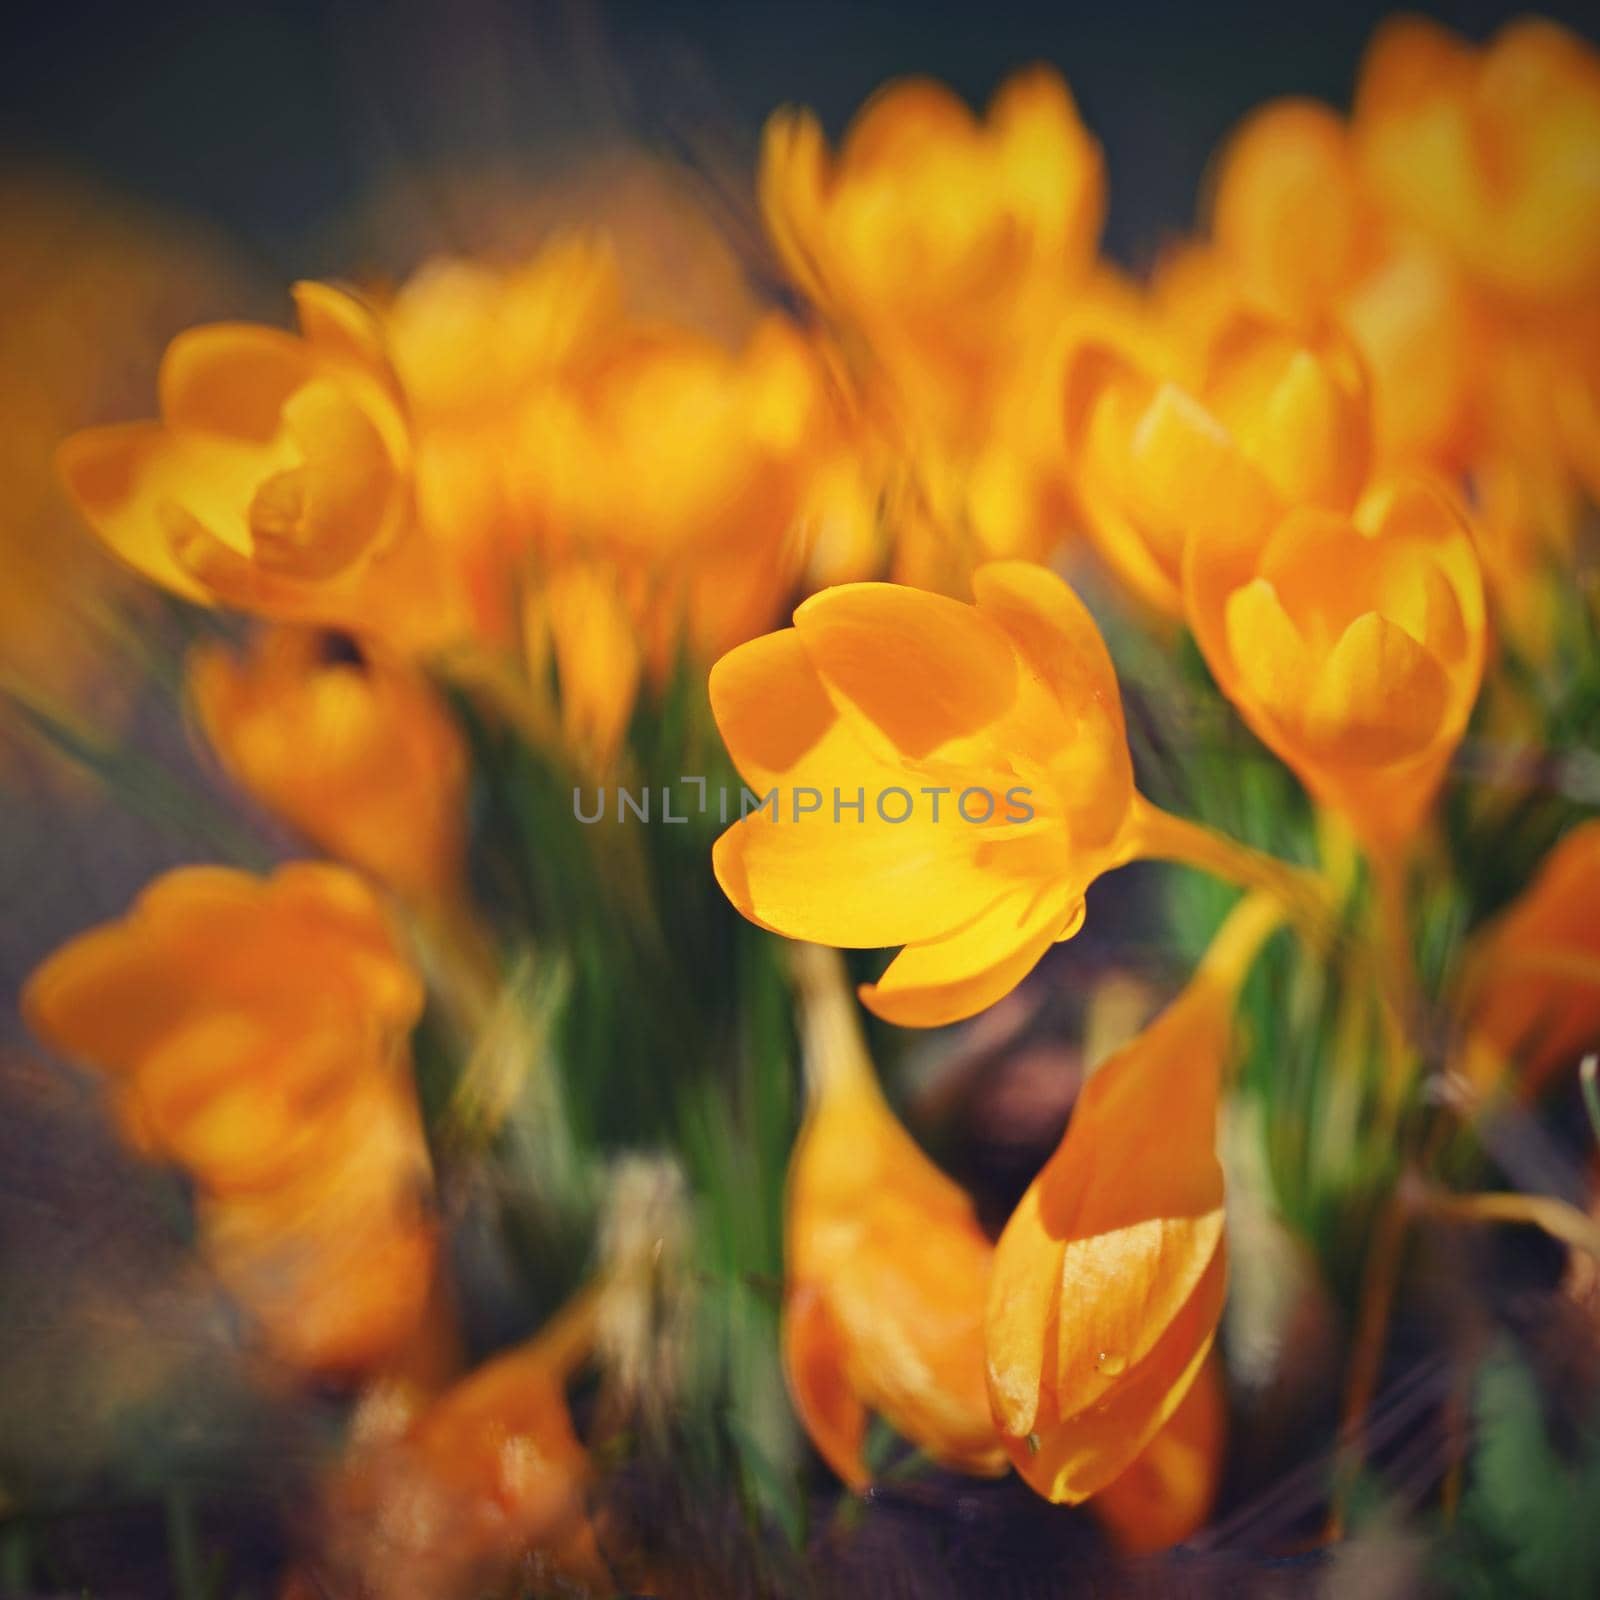 Spring flowers. Beautiful colorful first flowers on meadow with sun.
Crocus Romance Yellow - Crocus Chrysanthus - Crocus tommasinianus - Crocus Tommasini.